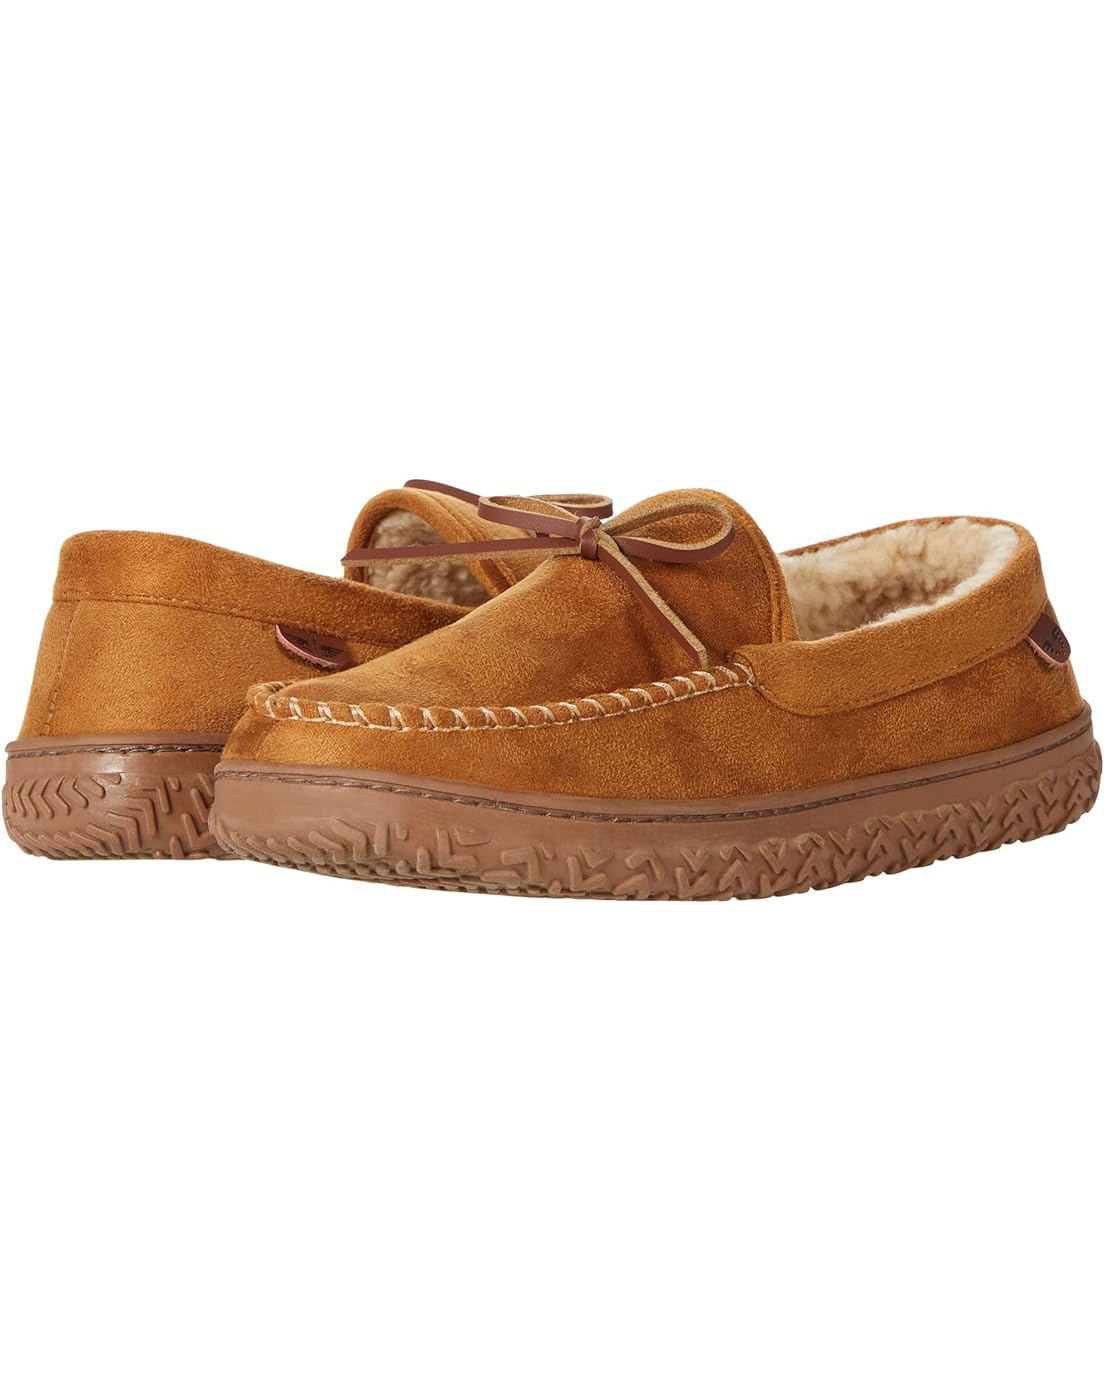 Dockers Rugged Boater Moccasin